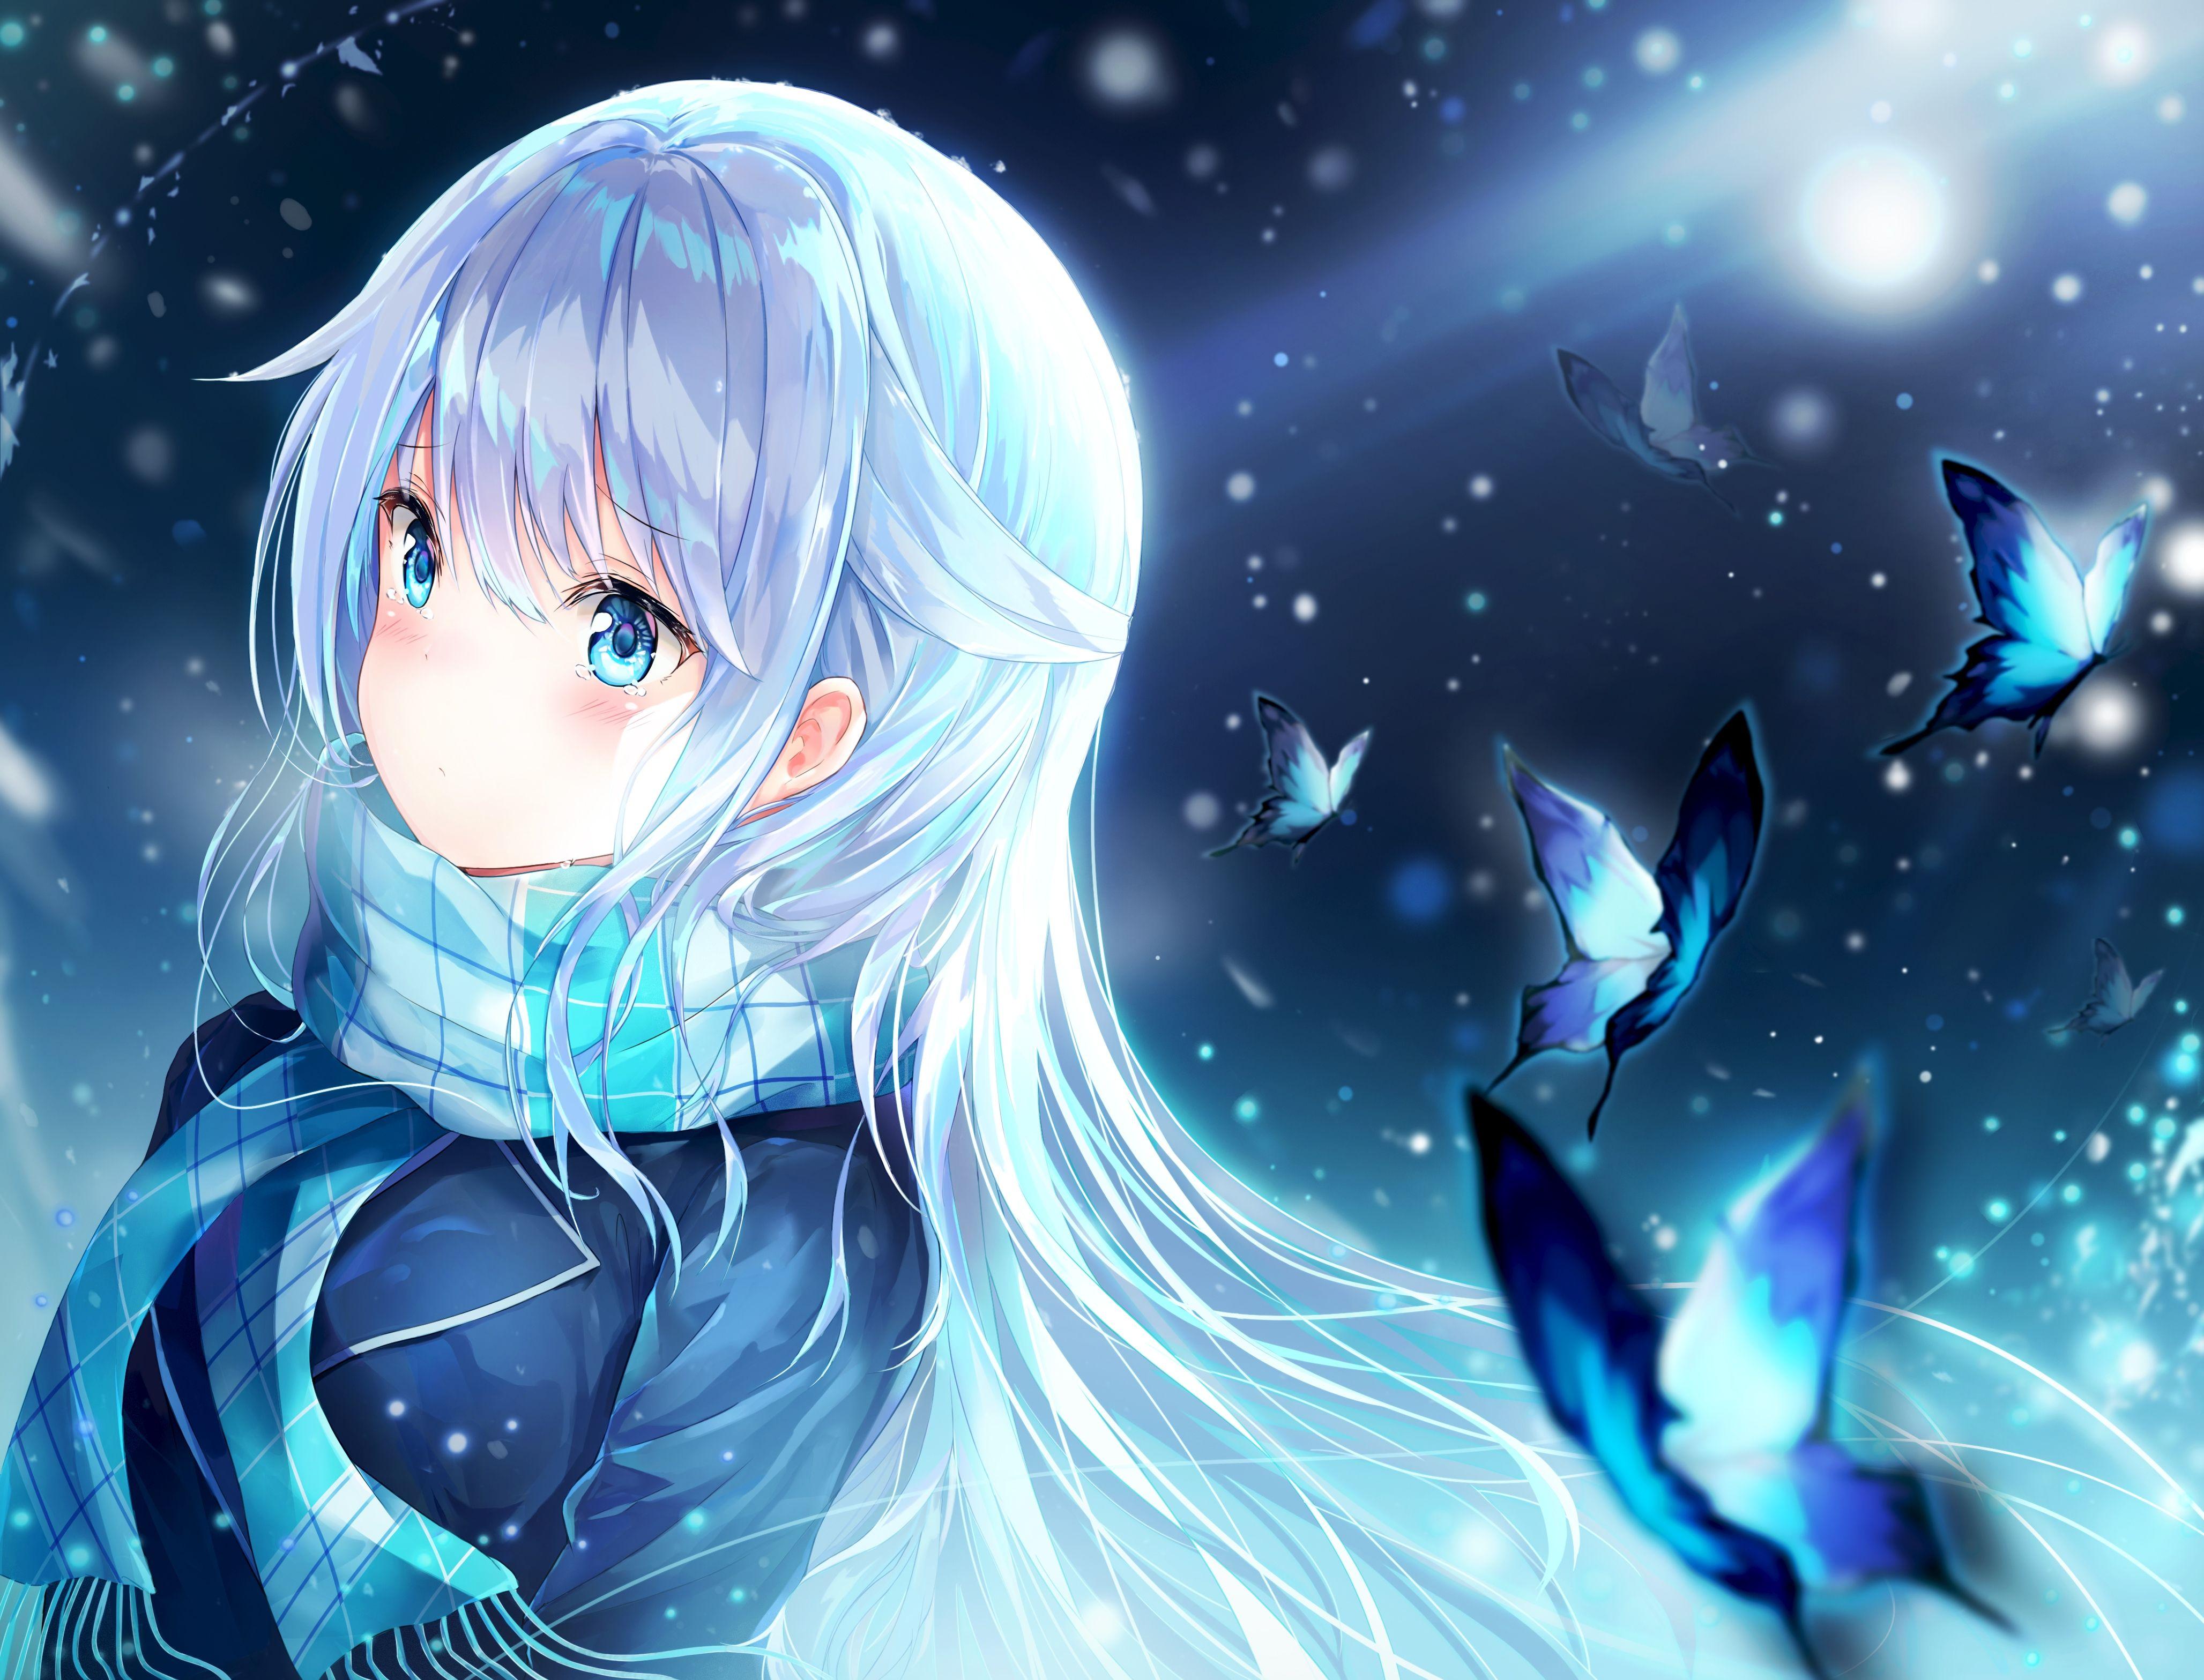 Anime Girl With White Hair Live Wallpaper